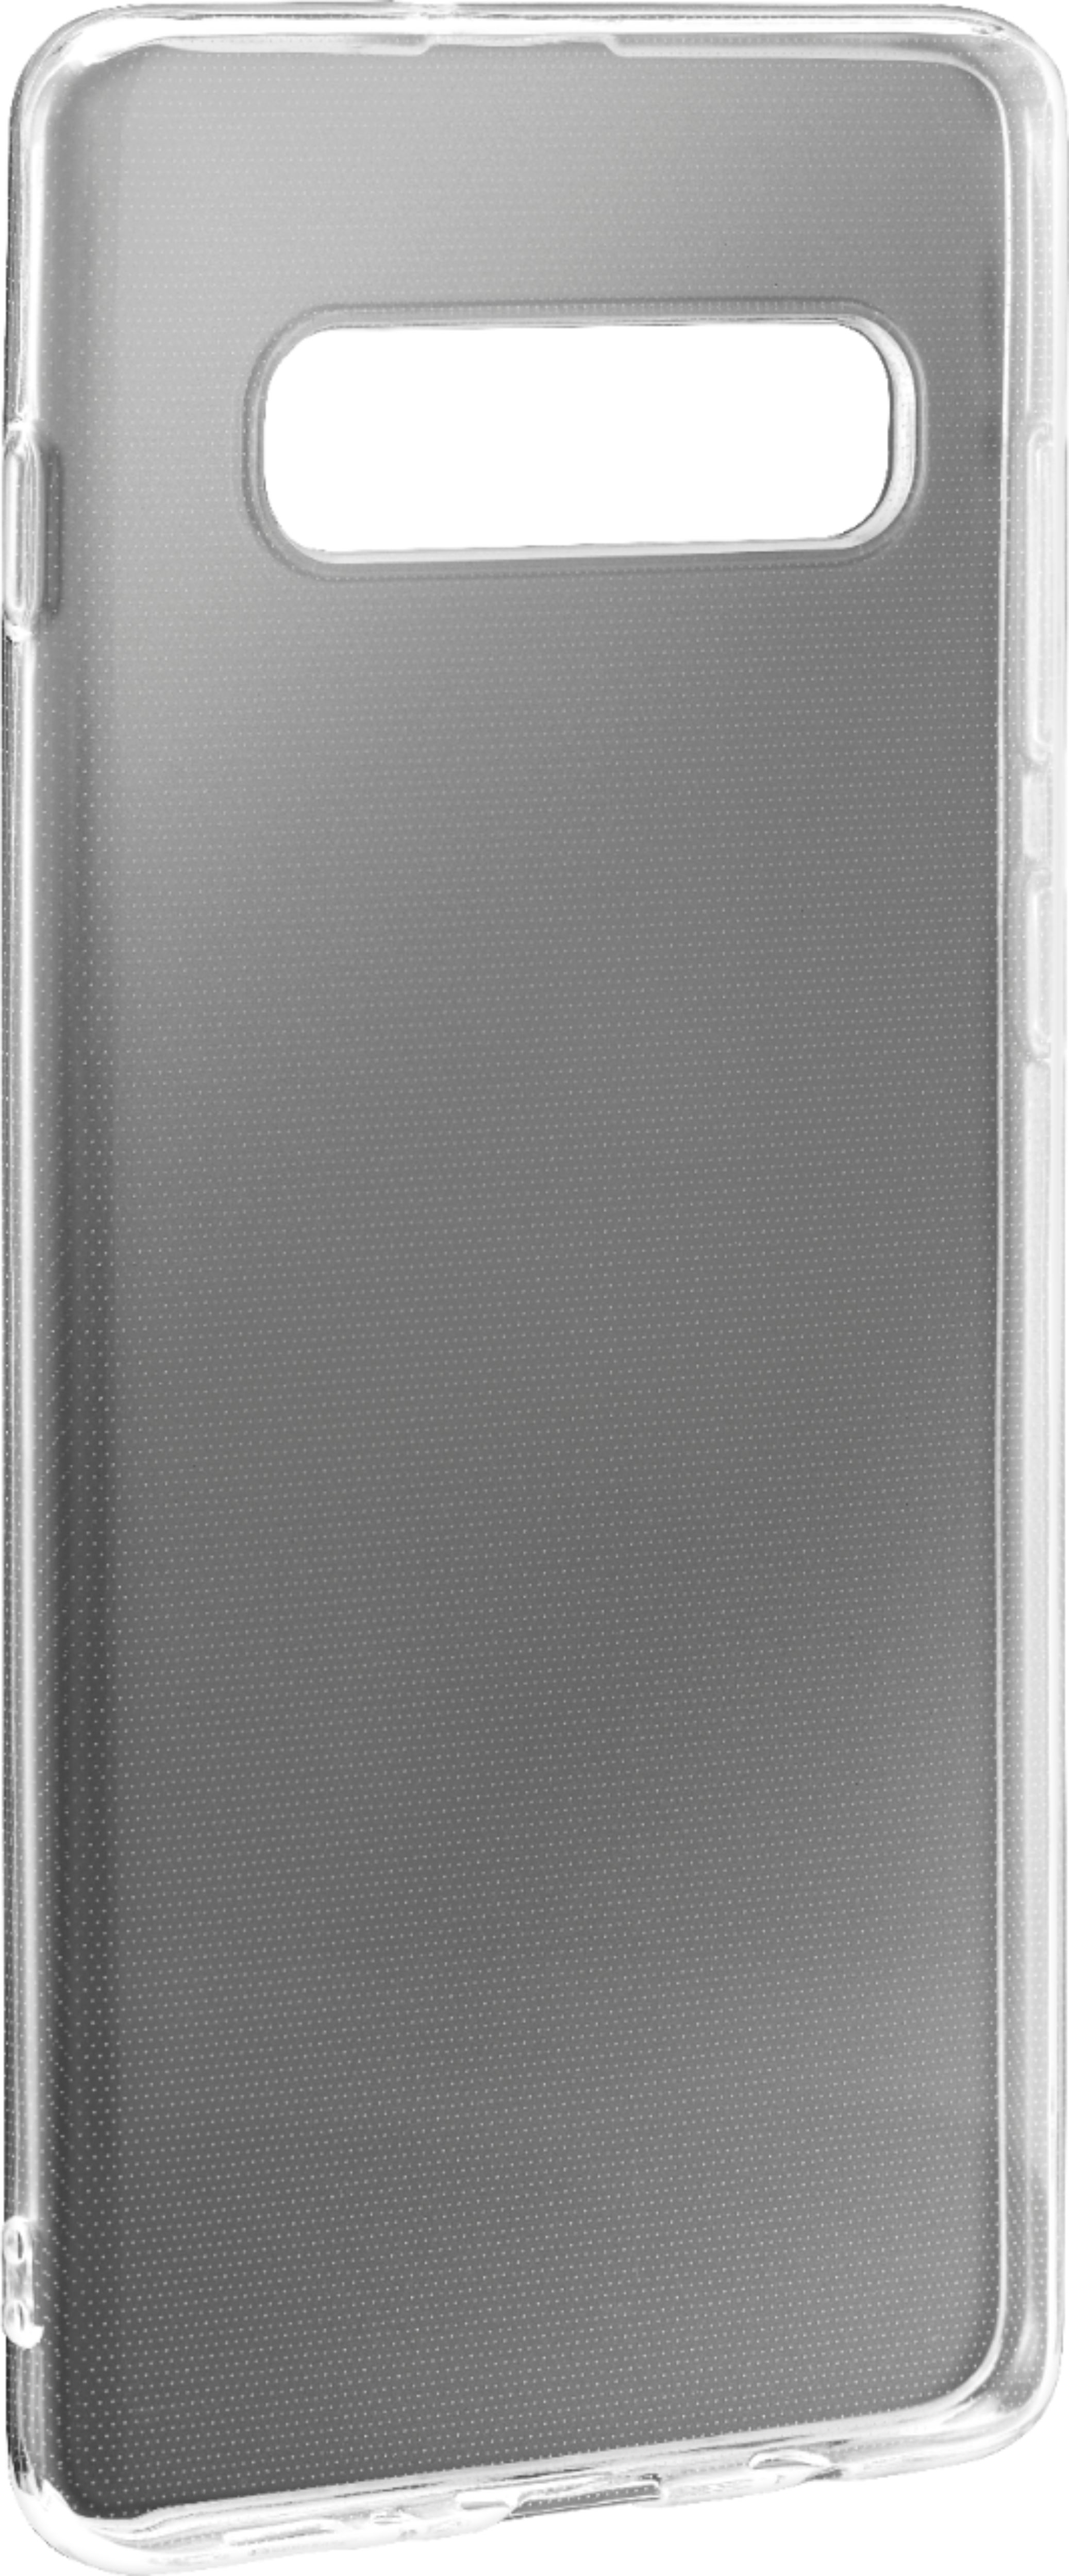 Angle View: Dynex™ - Skin Case for Samsung Galaxy S10+ - Semi-Clear